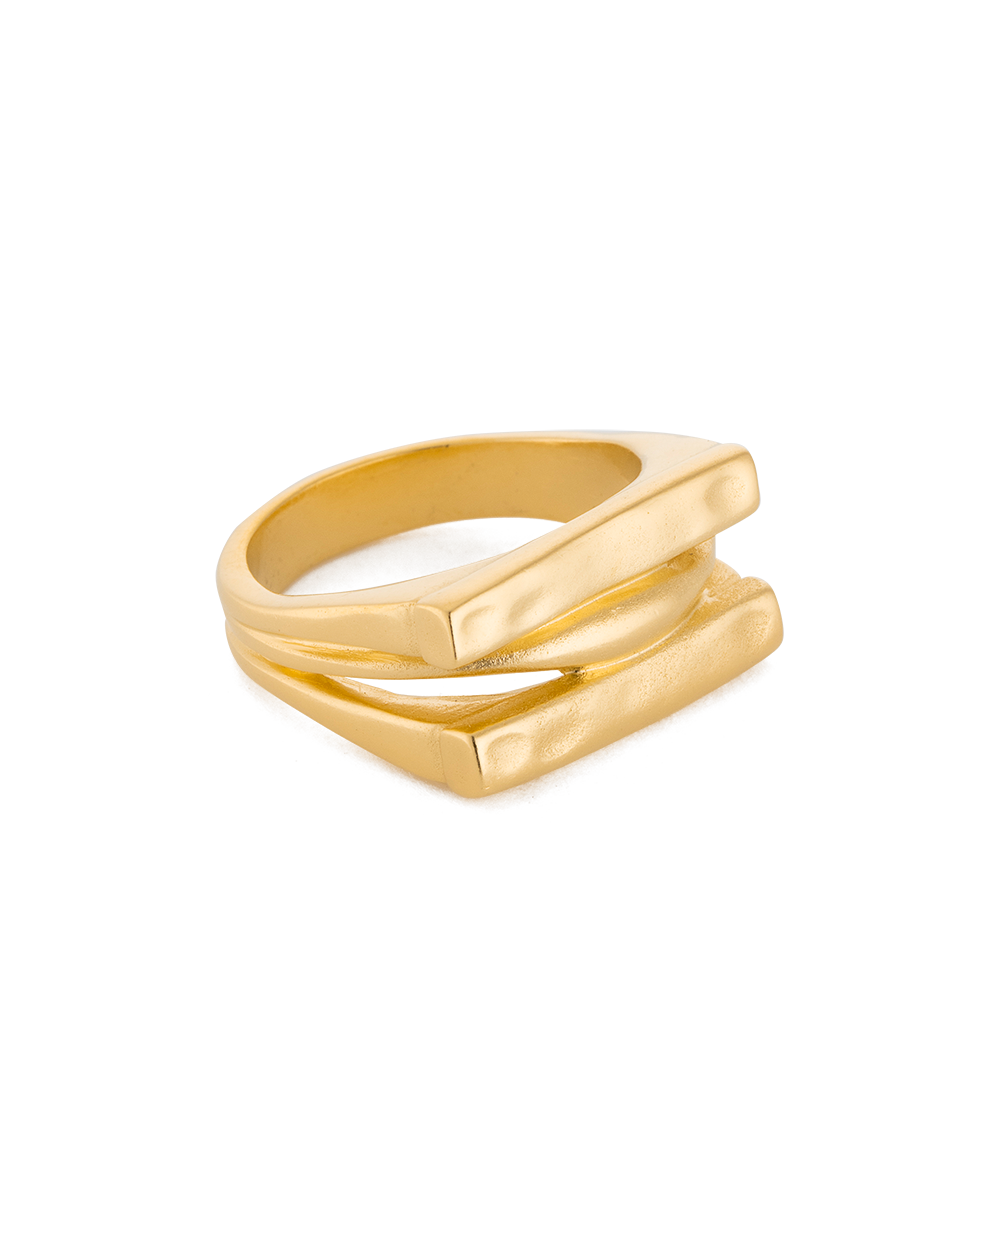 ELEMENTS RING (18K GOLD PLATED) - IMAGE 1